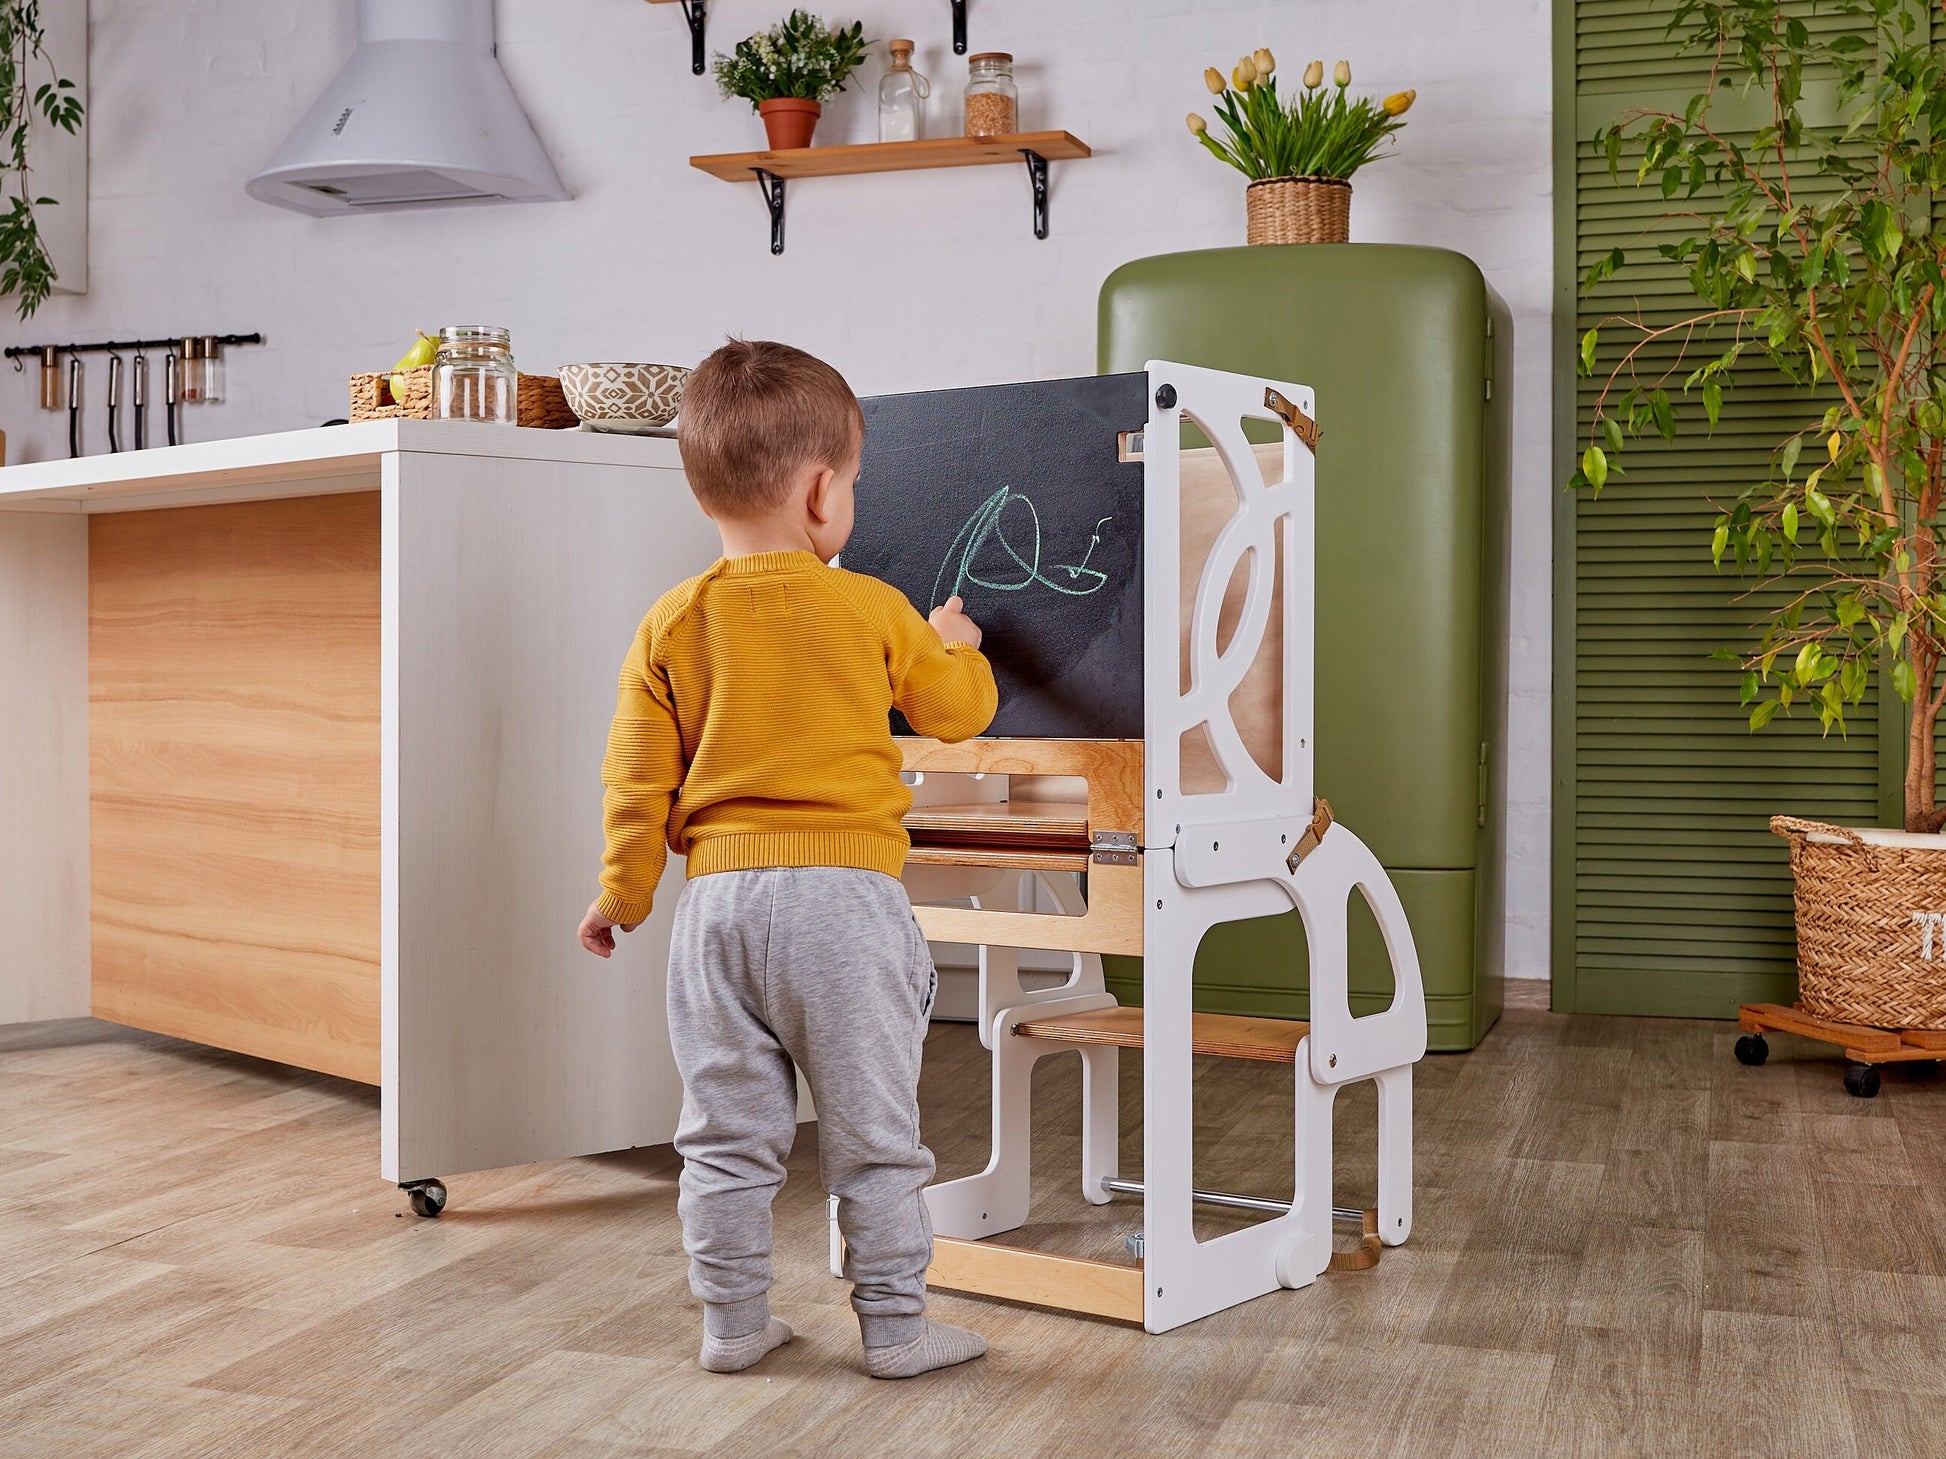 Kitchen tower toddler table 7 in 1 convertible learning kitchen step stool help tower Montessori desk & Paper roll, toddler standing tower